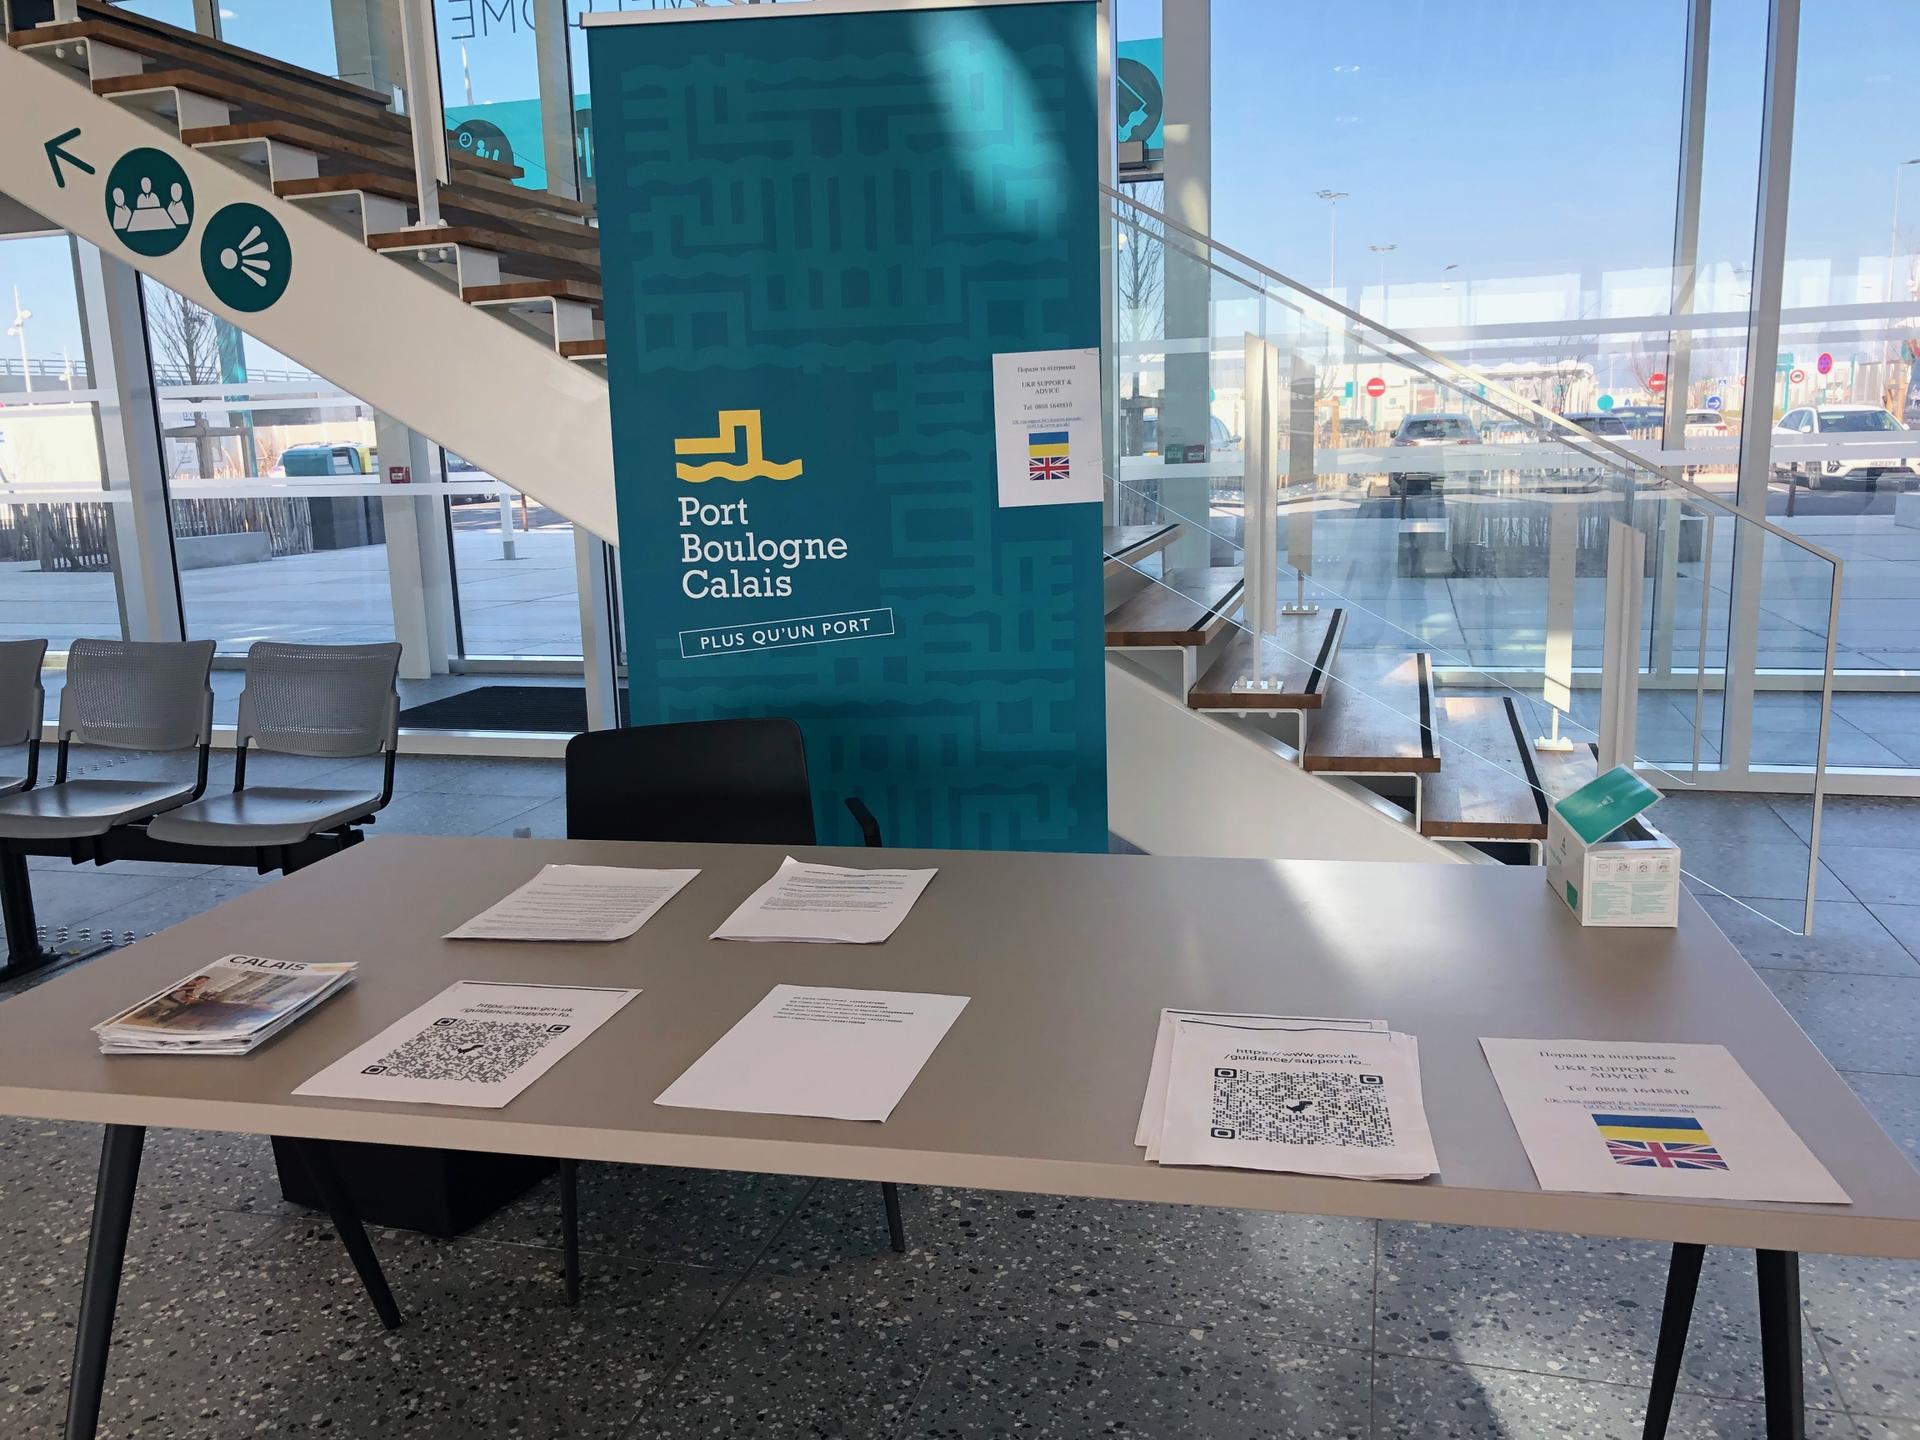 British Immigration Officers at the ferry terminal in Calais, France, have set up an information booth for Ukrainians looking to reach the UK.